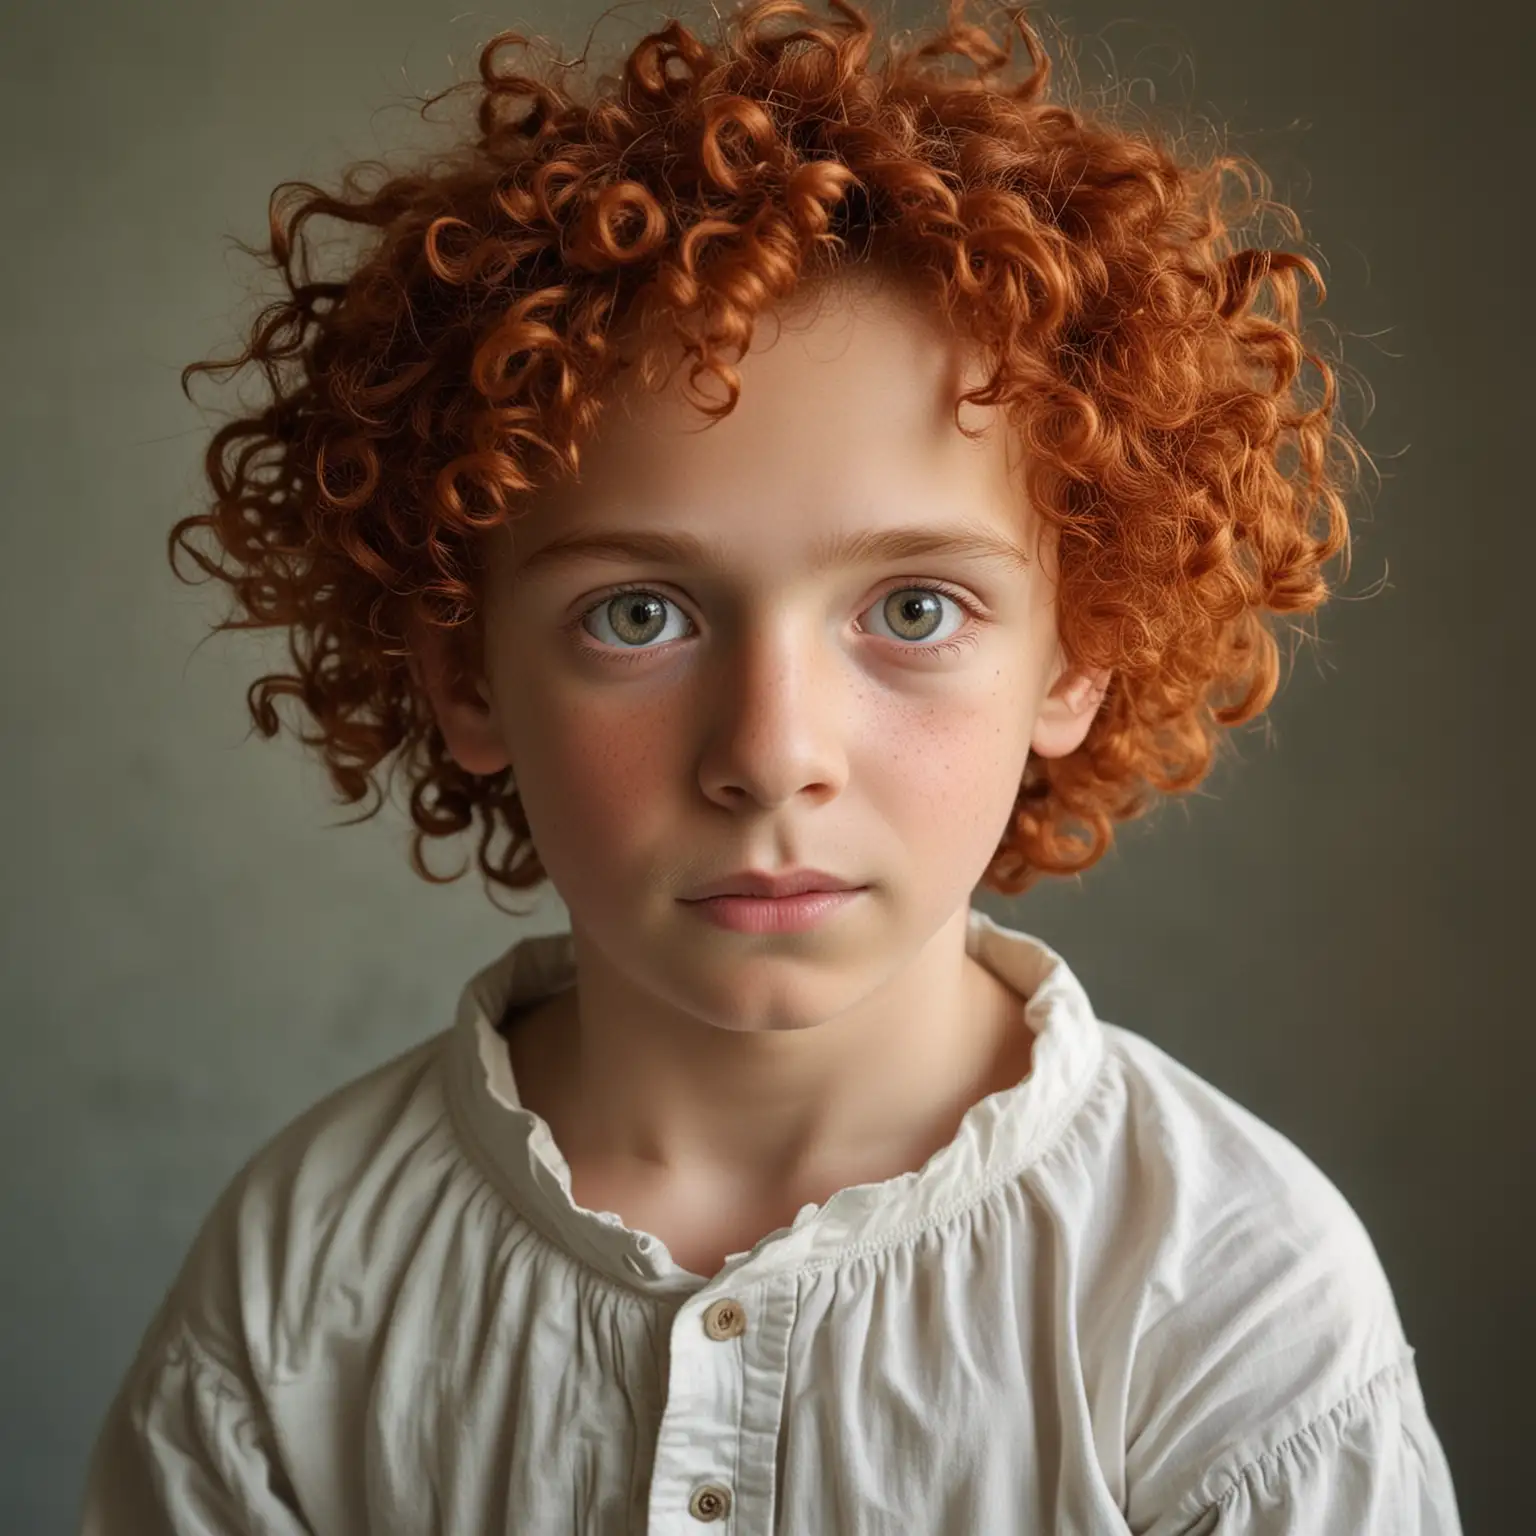 Portrait of a renaissance boy 
T shirt and red curly  hair
Blauwe ogen 
age 10 looking straight into camera
Very light skin